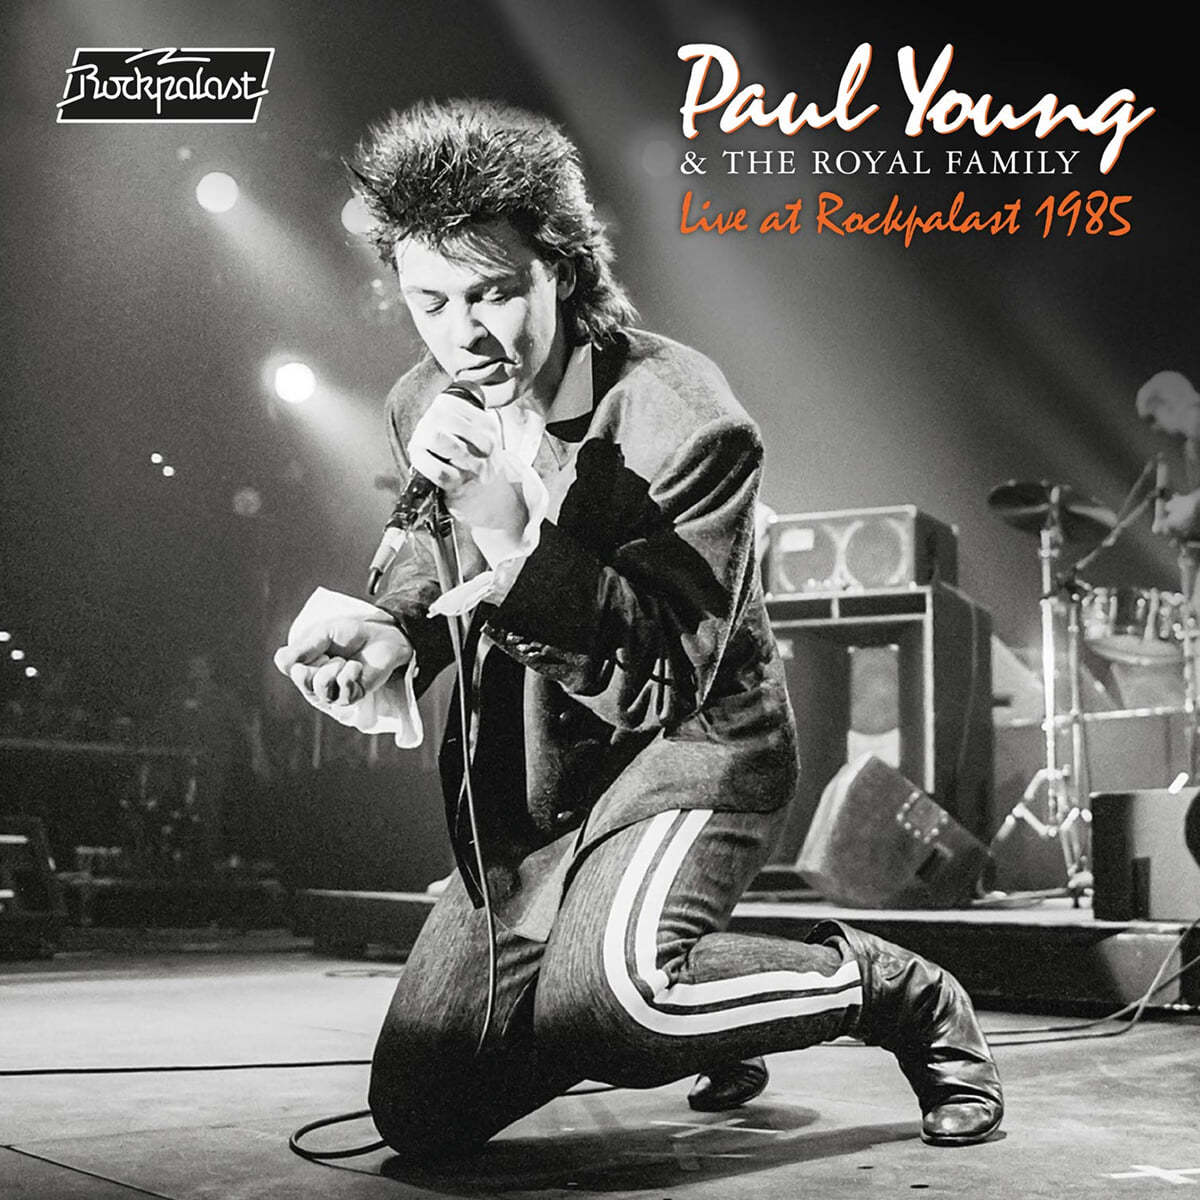 Paul Young / The Royal Family (폴 영 / 더 로얄 패밀리) - Live At Rockpalast 1985 [오렌지 컬러 2LP] 